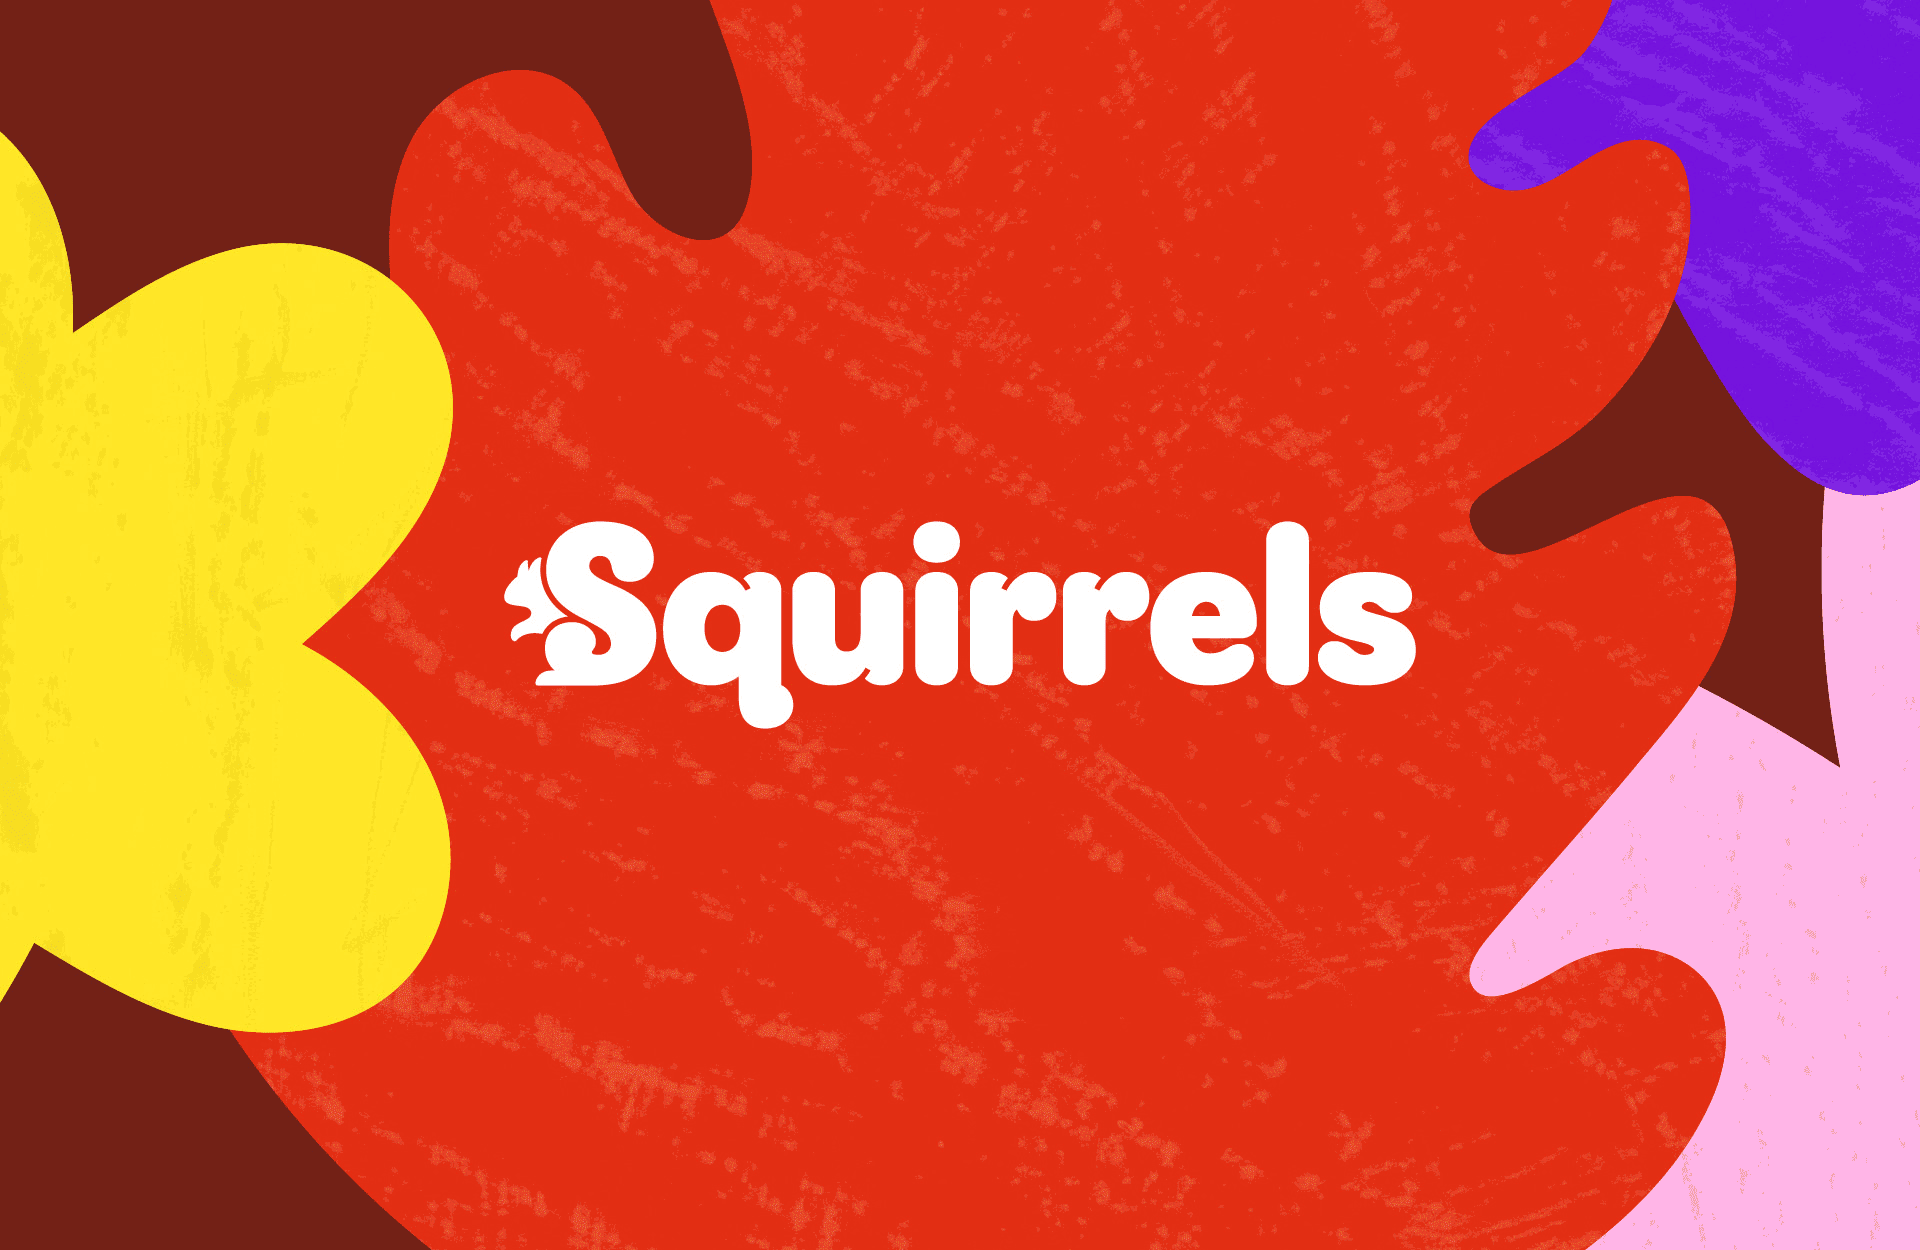 Scouts squirrels graphics